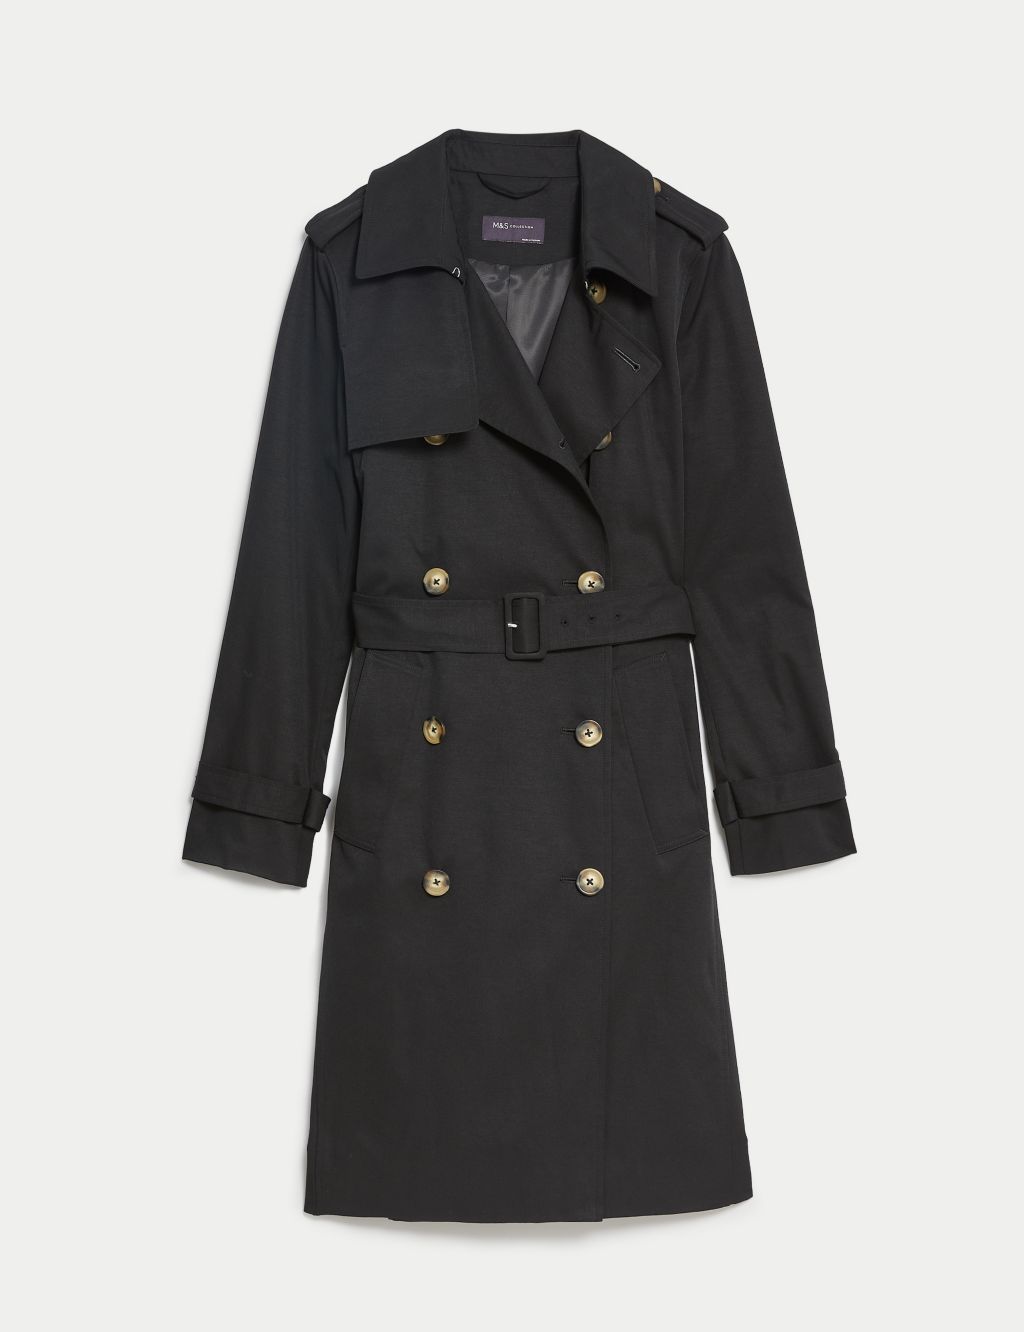 Stormwear™ Double Breasted Trench Coat image 2